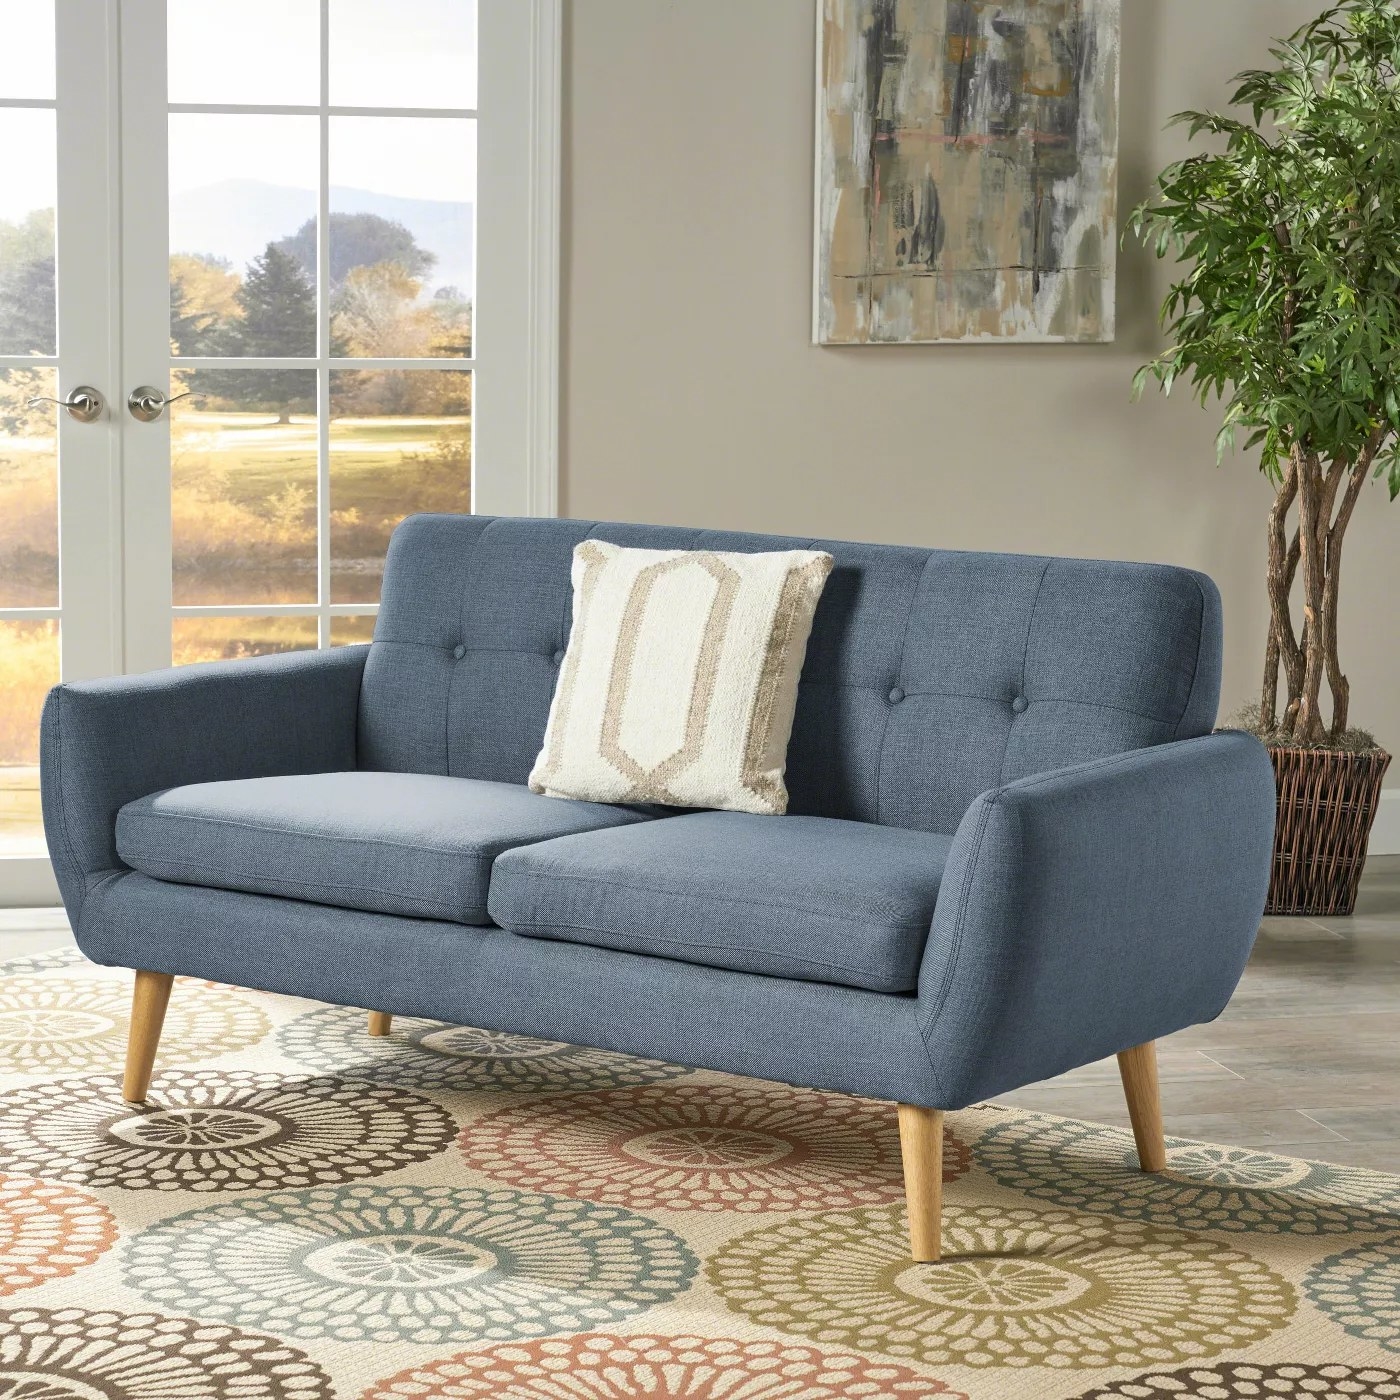 The blue sofa with wooden legs